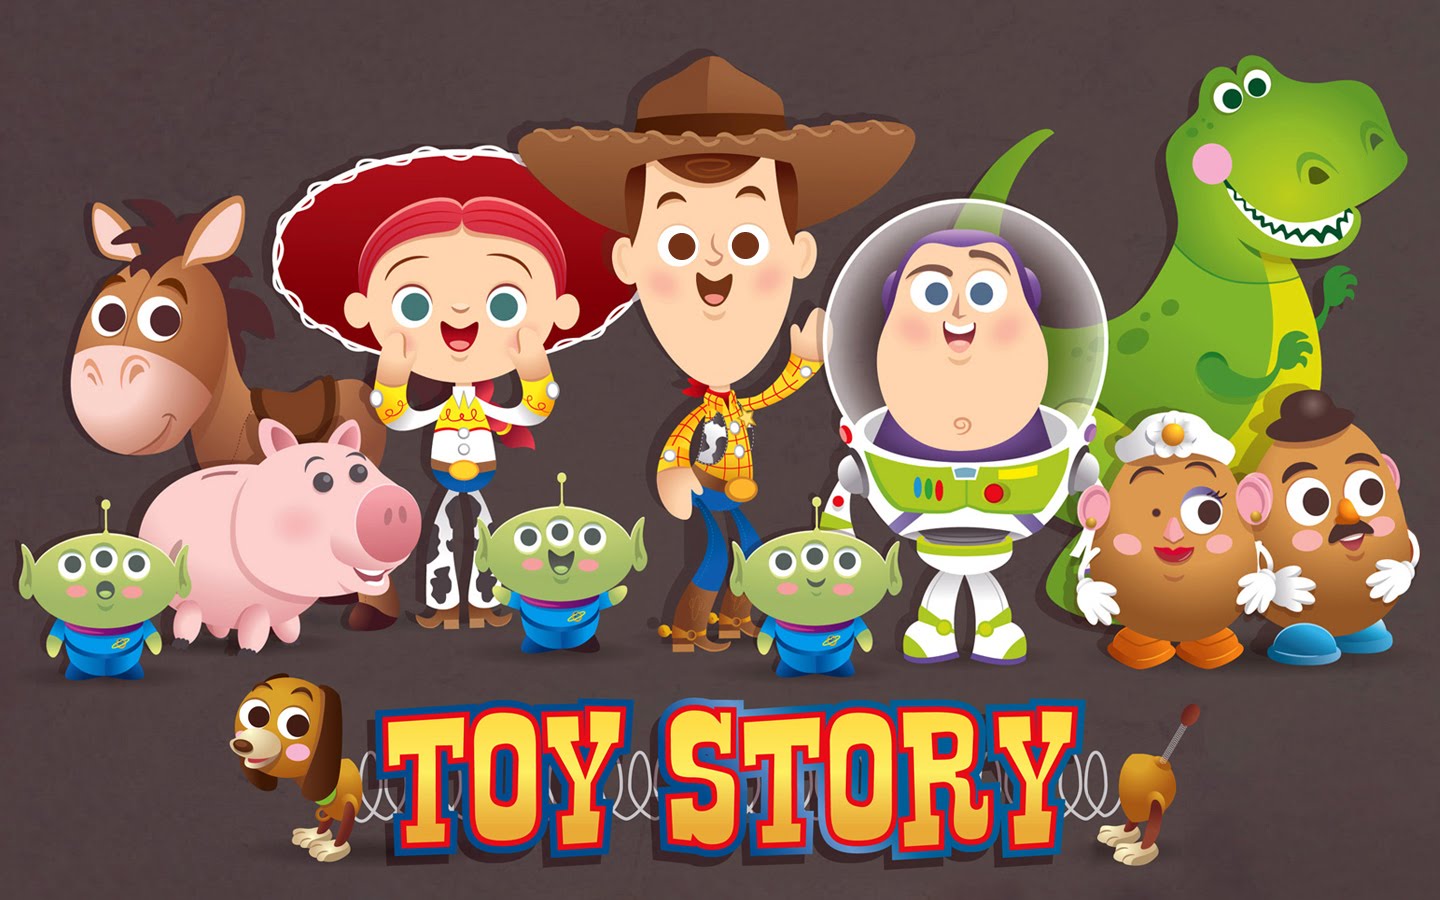 Toy Story 3 Wallpaper Picture 5559 1440x900 px ~ WallpaperFort.com